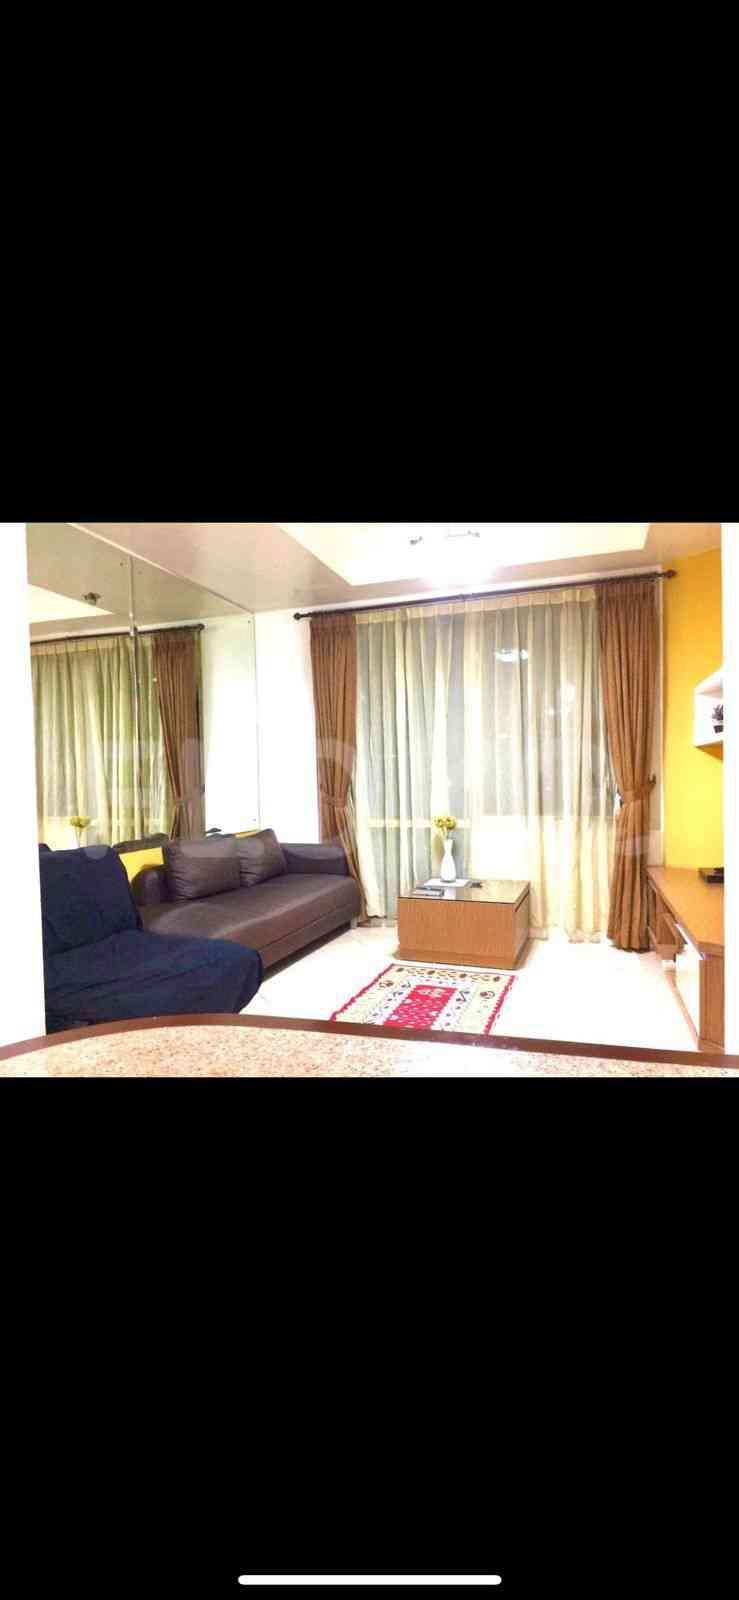 1 Bedroom on 17th Floor for Rent in Batavia Apartment - fbe73e 3